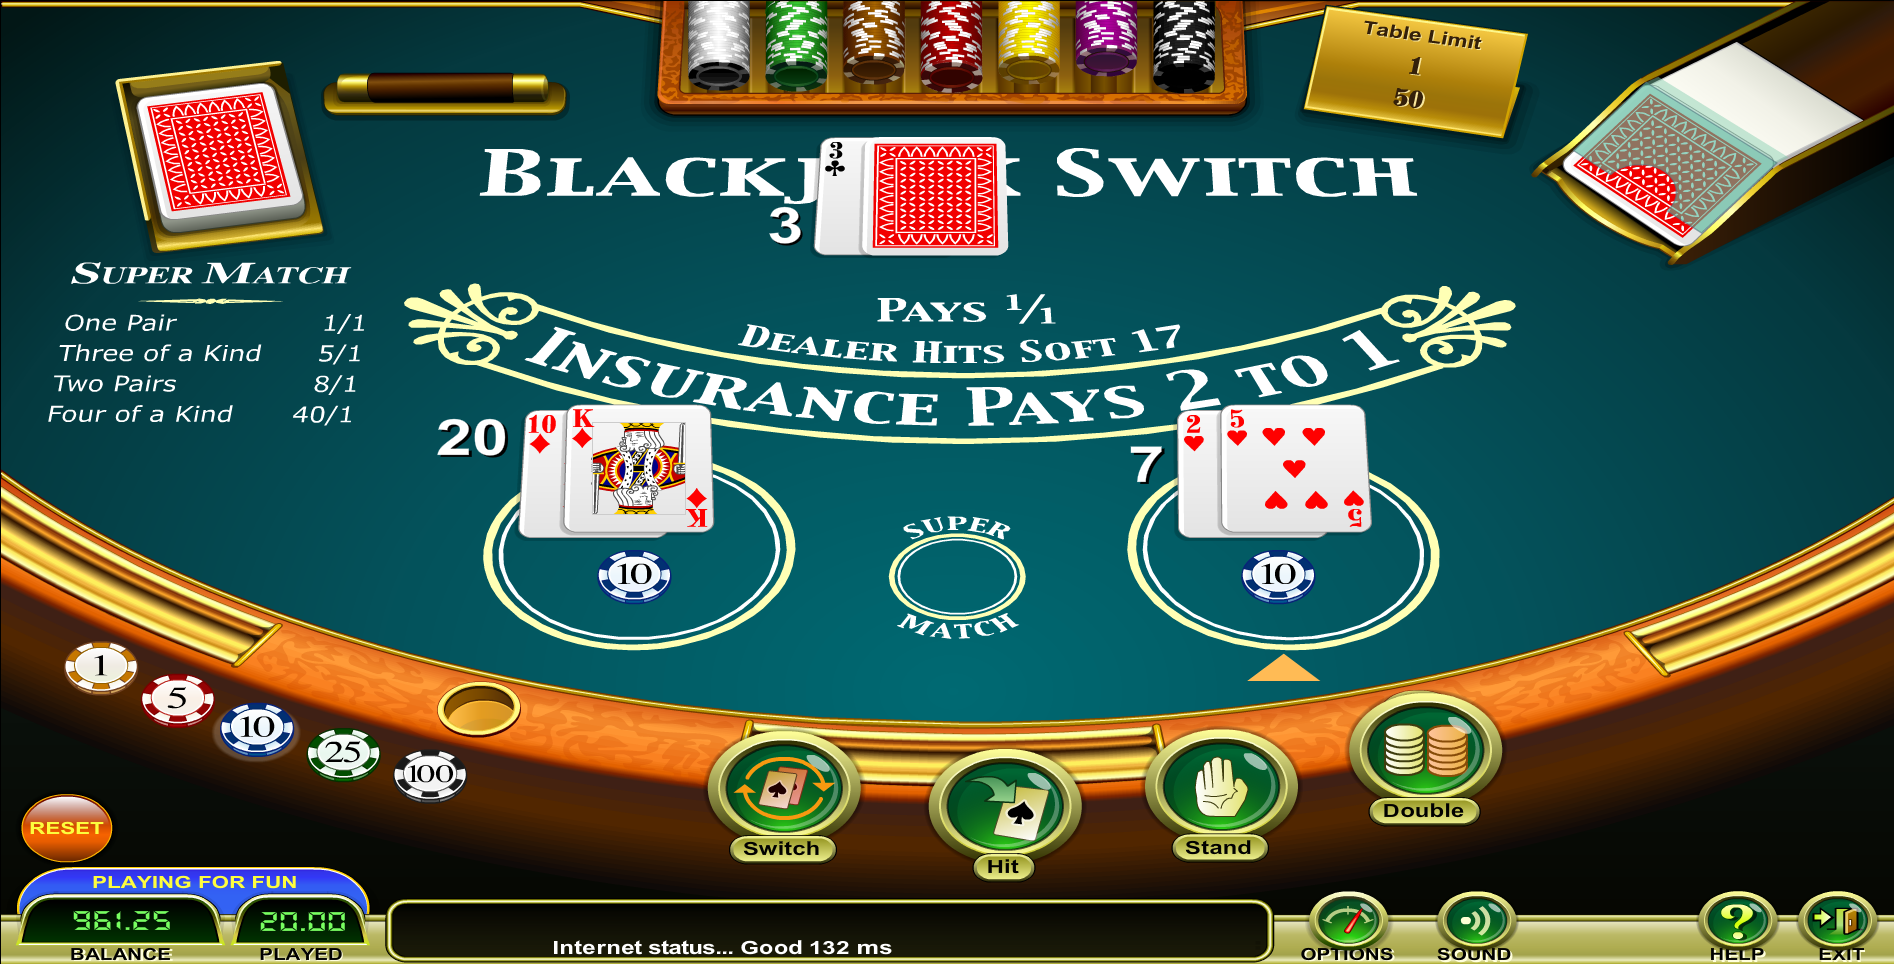 How to win in a game of blackjack?